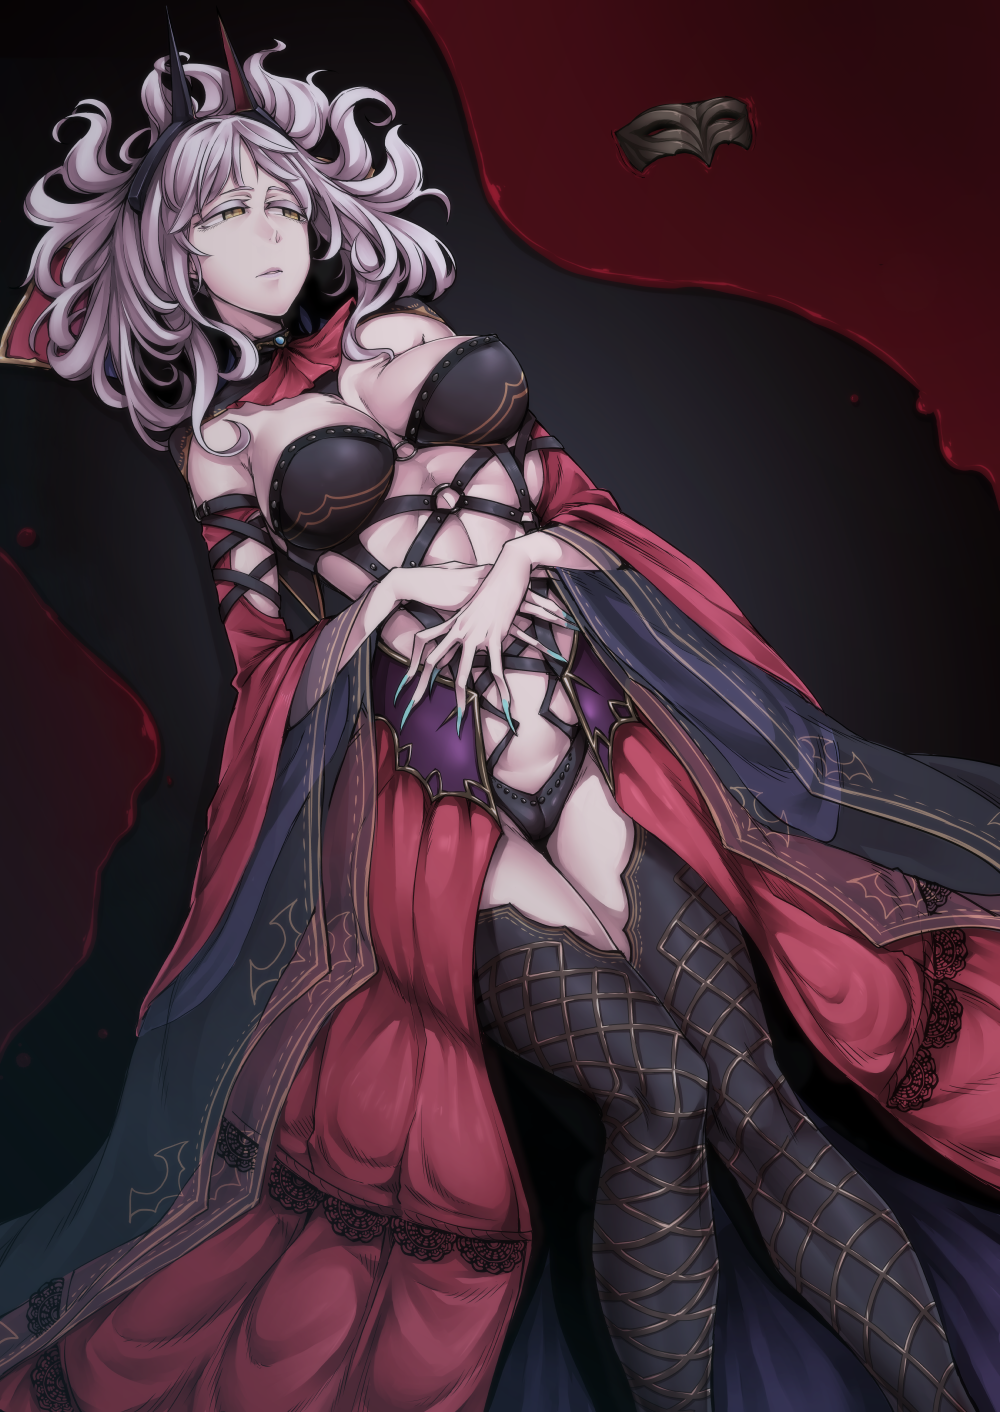 vampires - Characters: Vampires __carmilla_fate_grand_order_and_fate_series_drawn__by_rachelrenston-dbjds6s